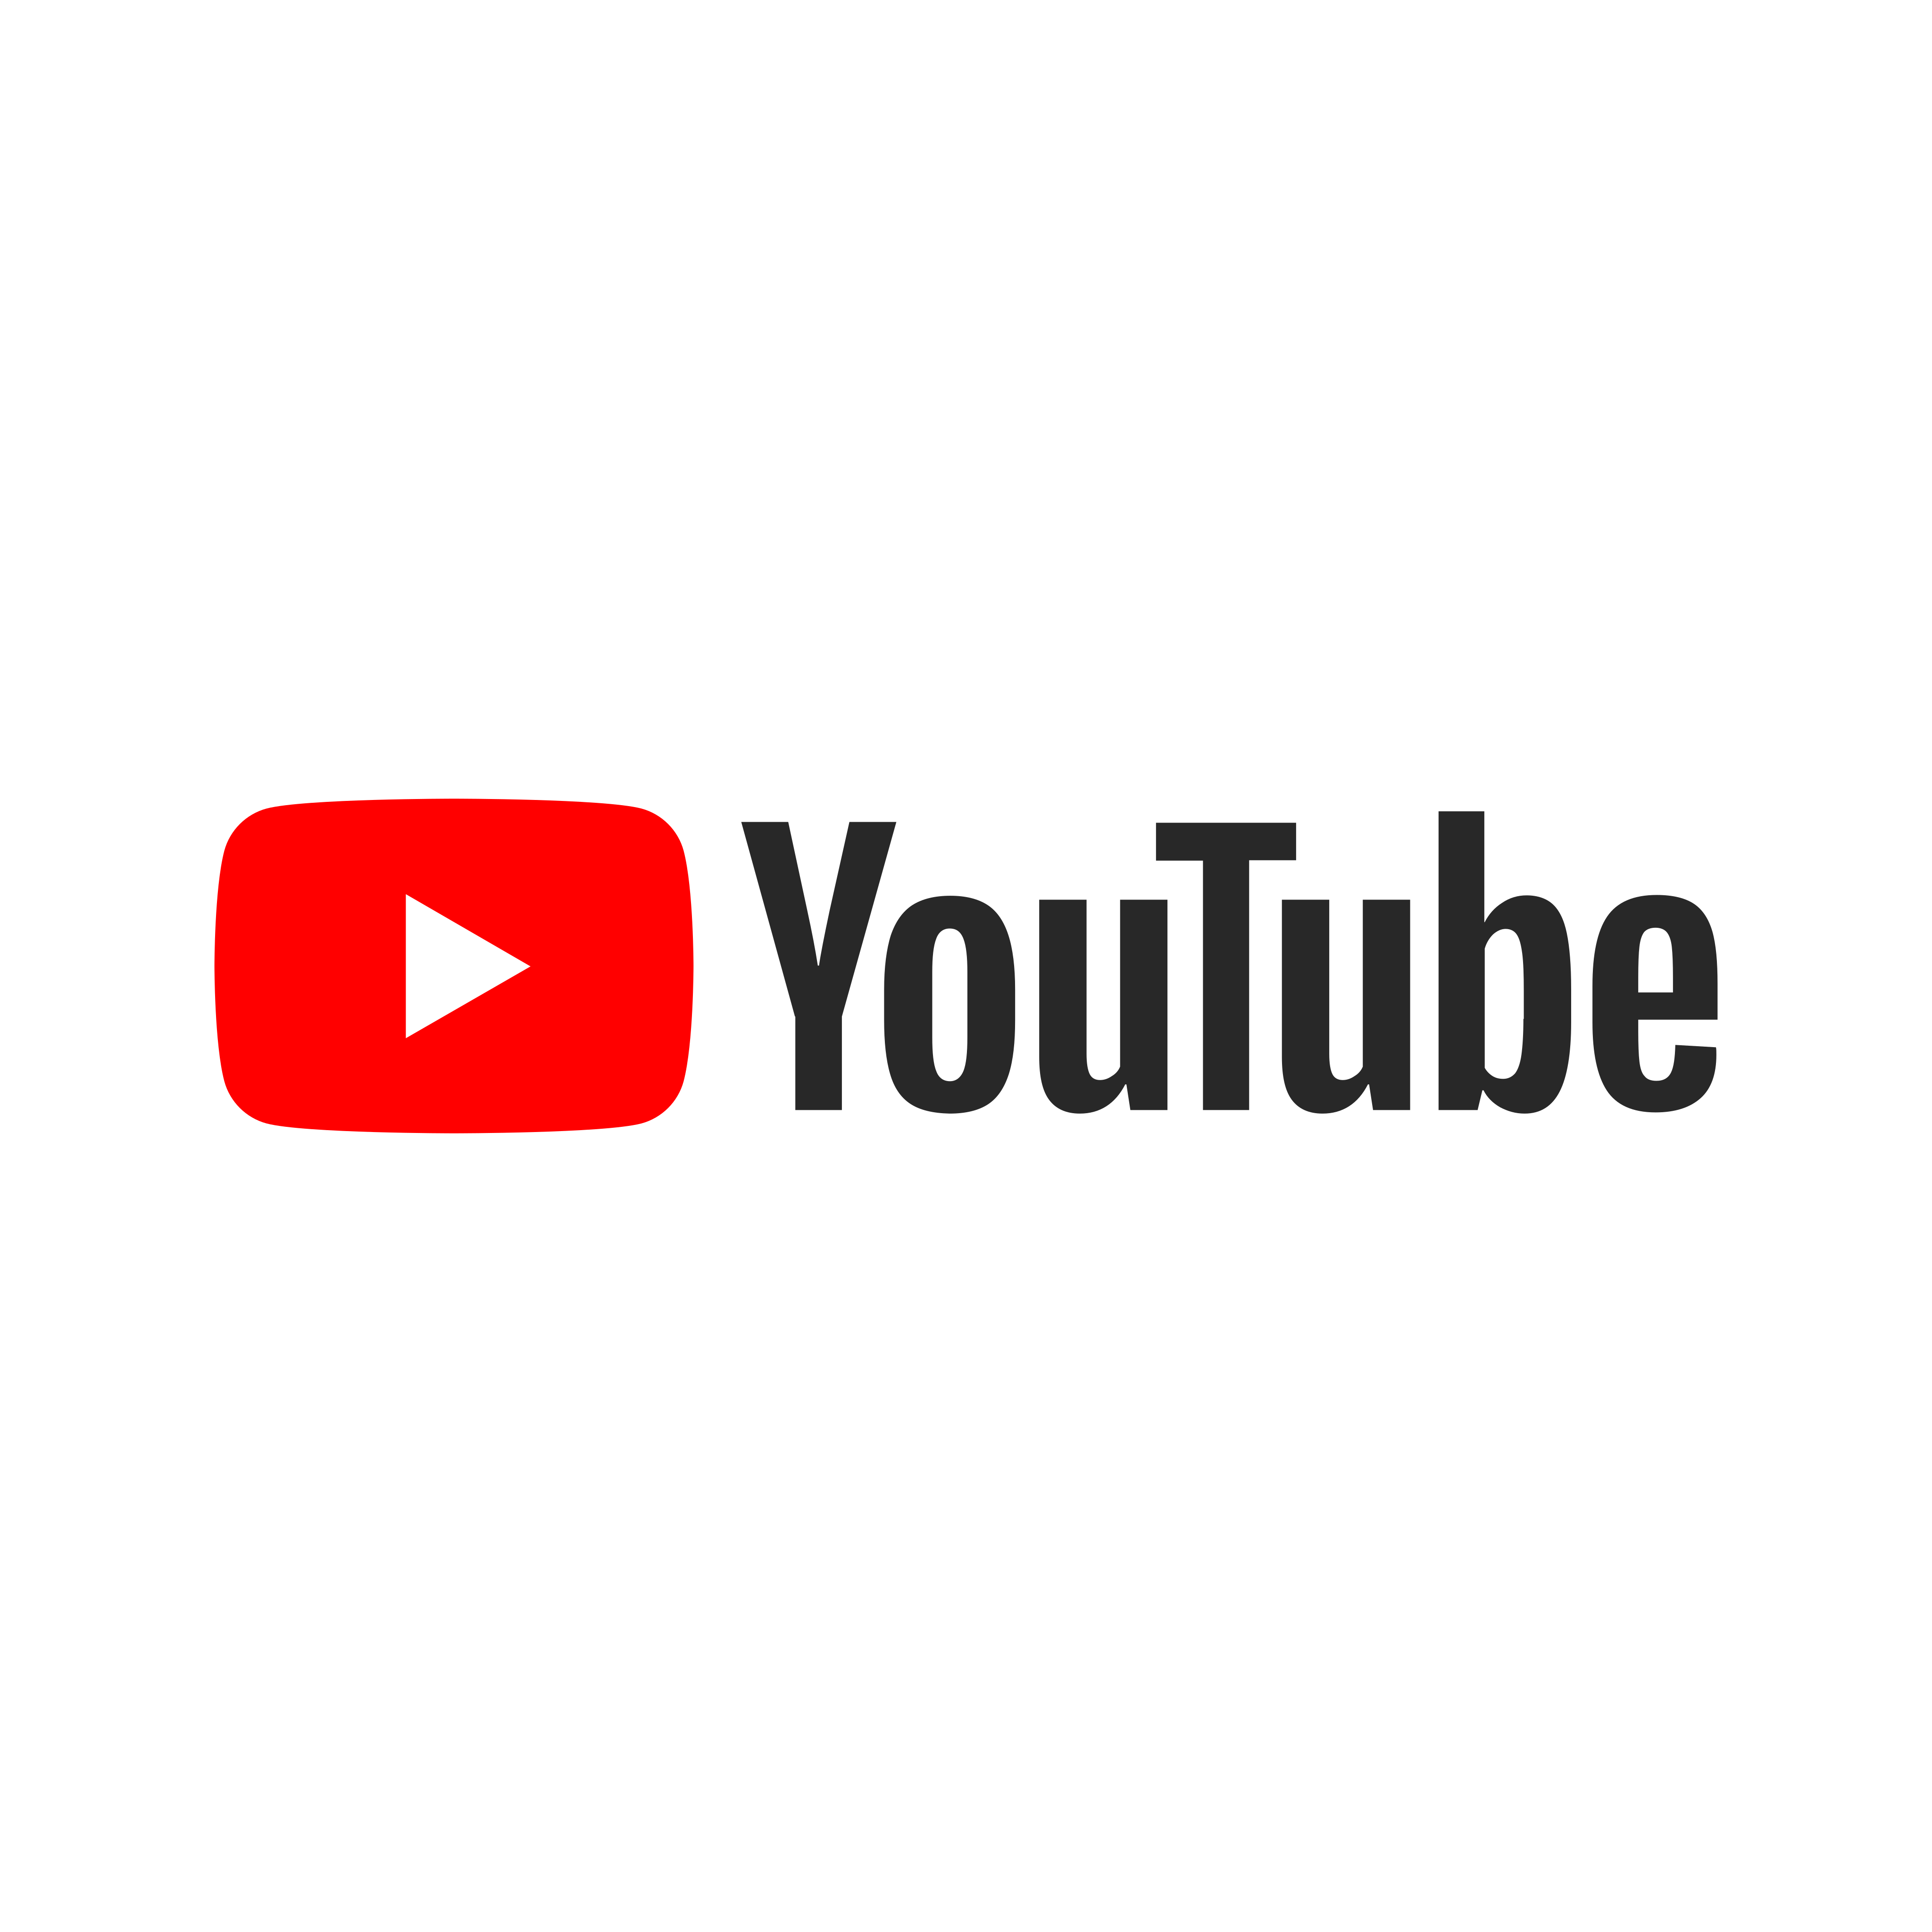 Youtube Logo - PNG and Vector - Logo Download